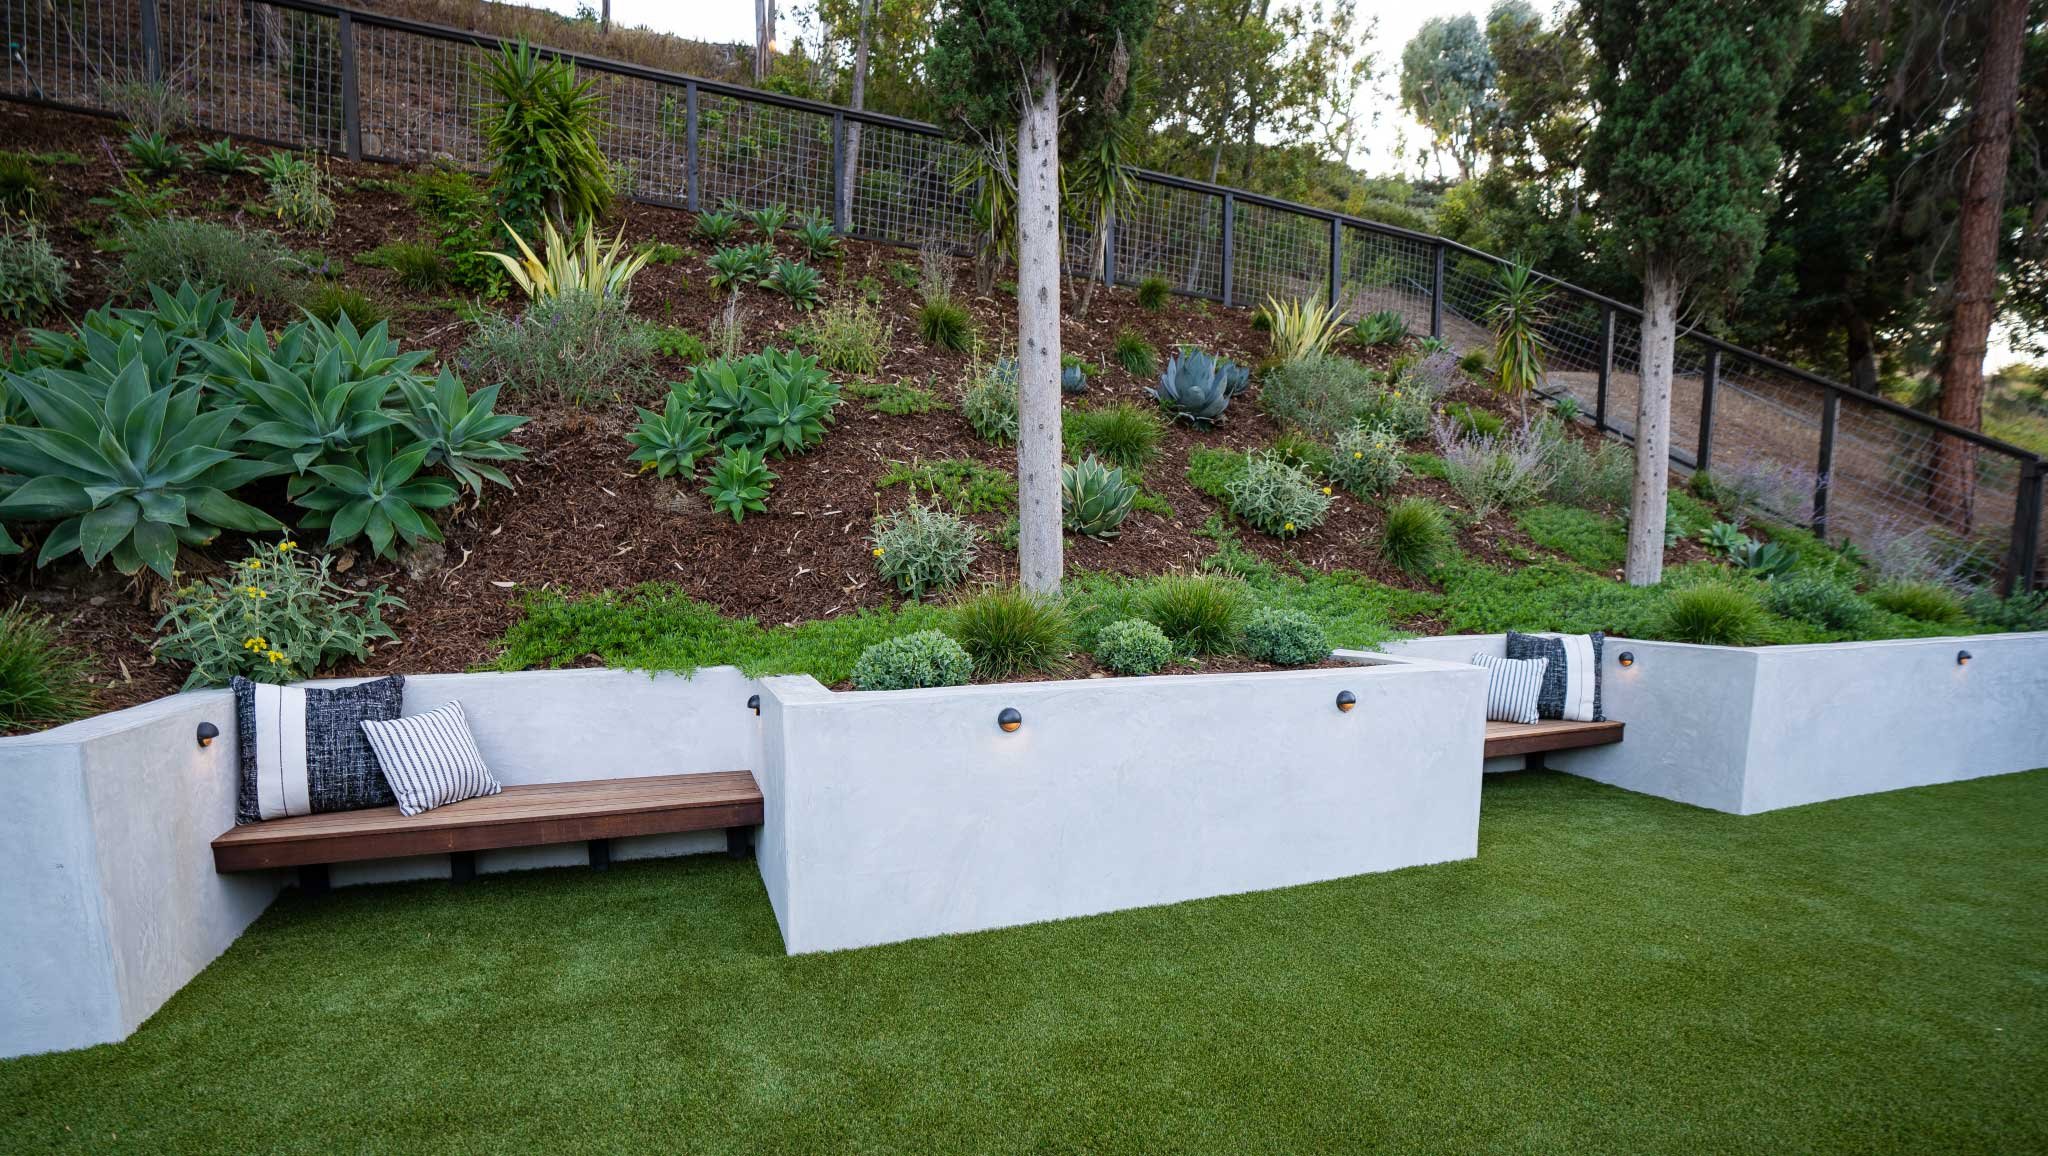 Close up of retaining wall with built in benches and plantings on slope